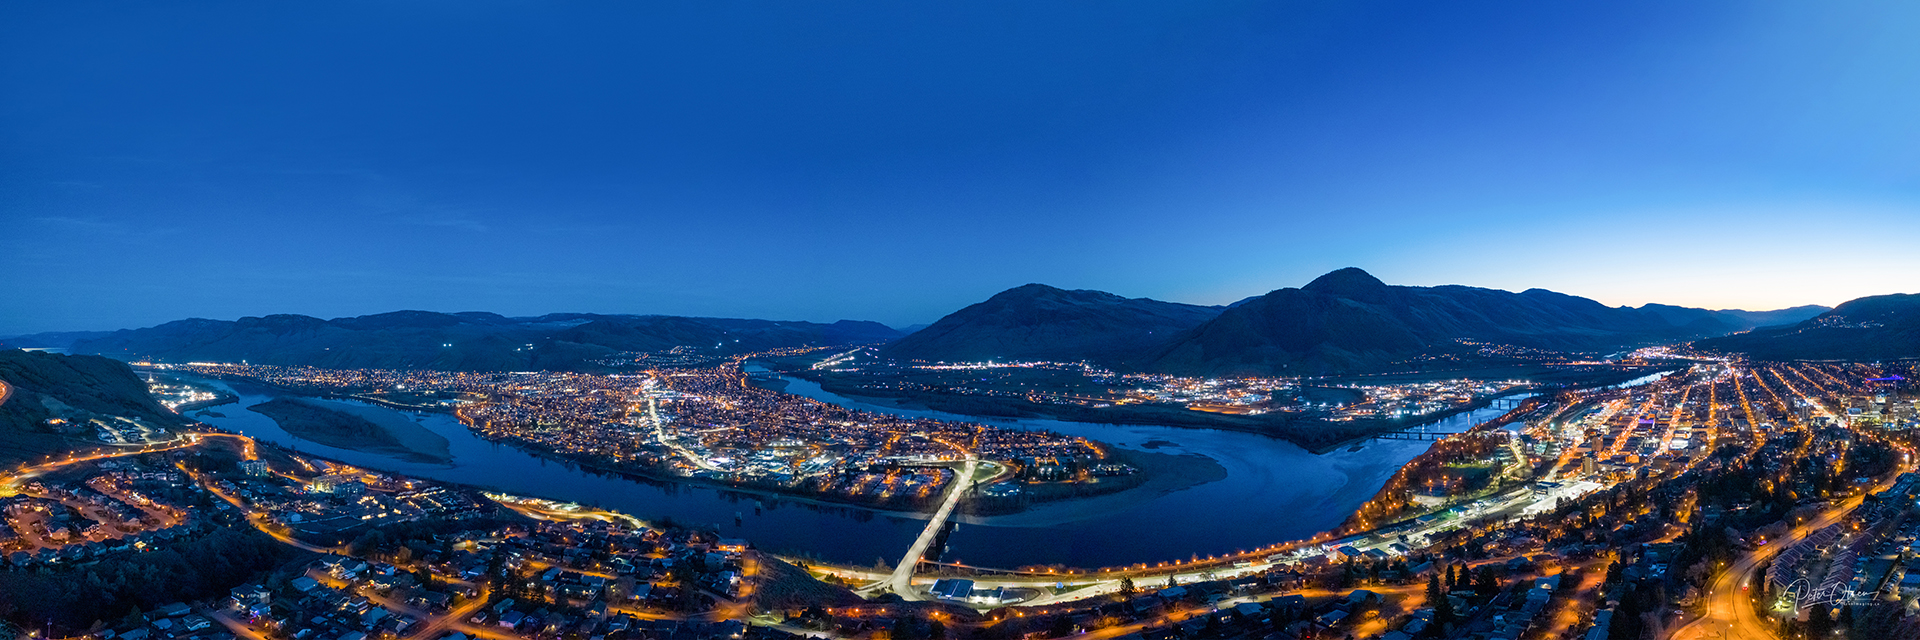 Kamloops City Aerial bright blue sky with city lights